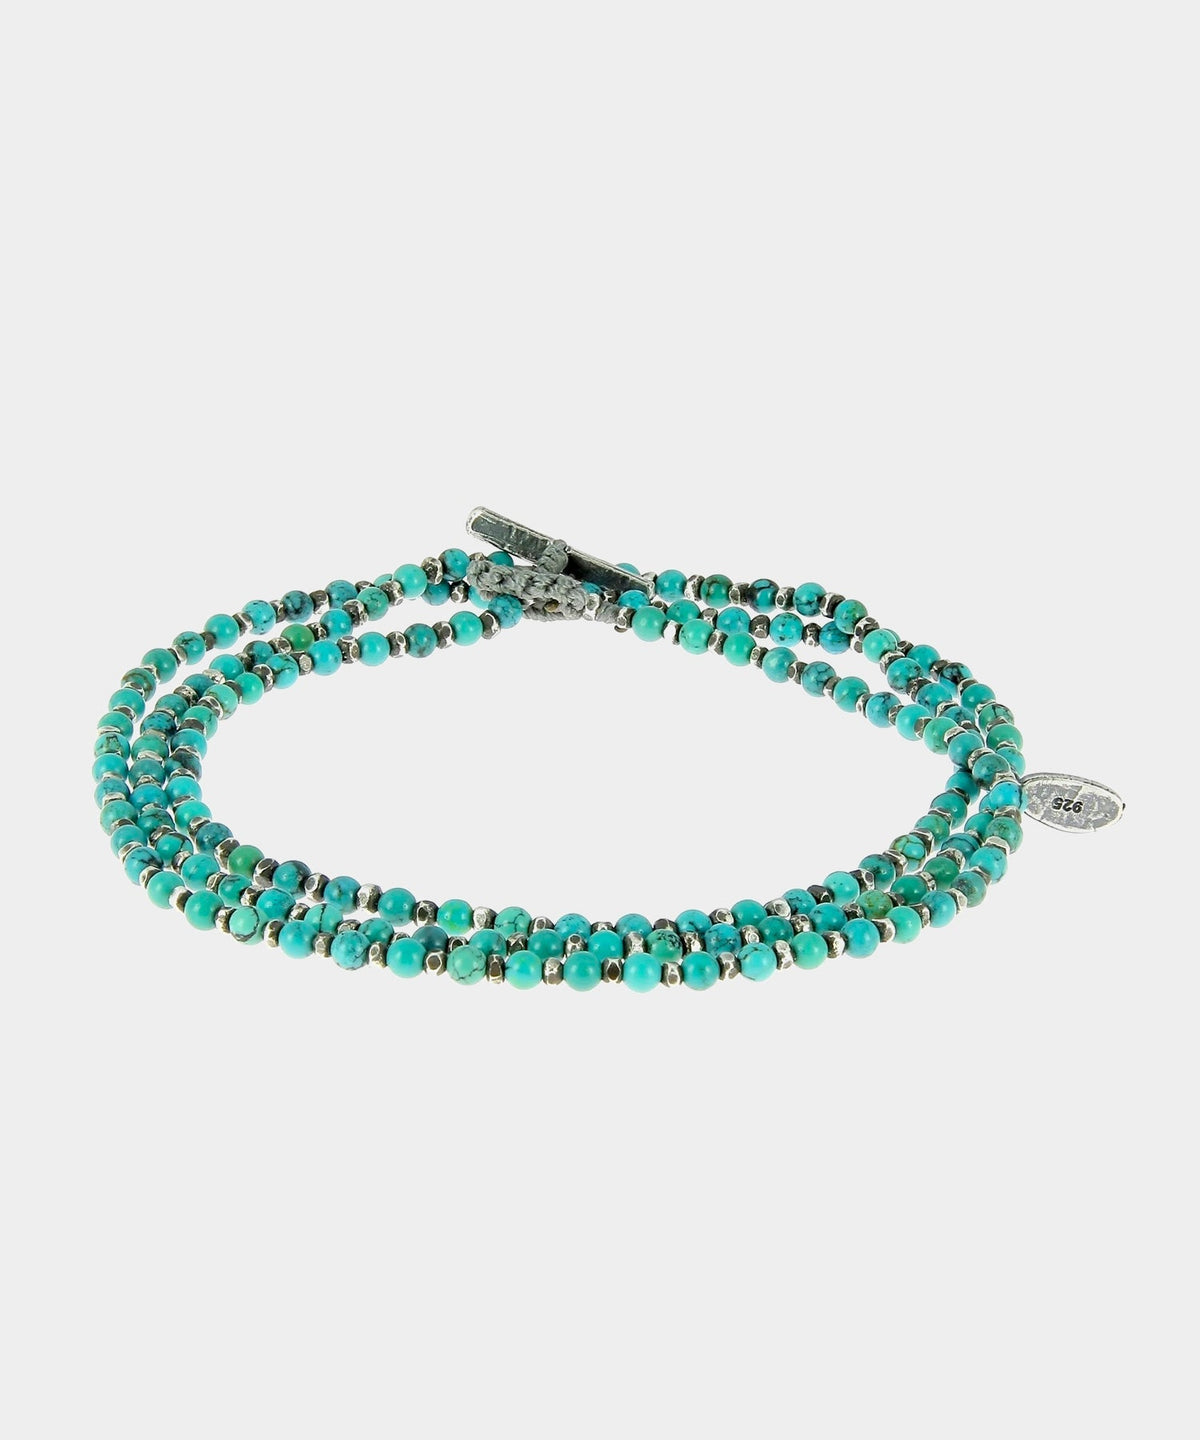 M. Cohen The Silver Agora Bracelet /Necklace in Turquoise